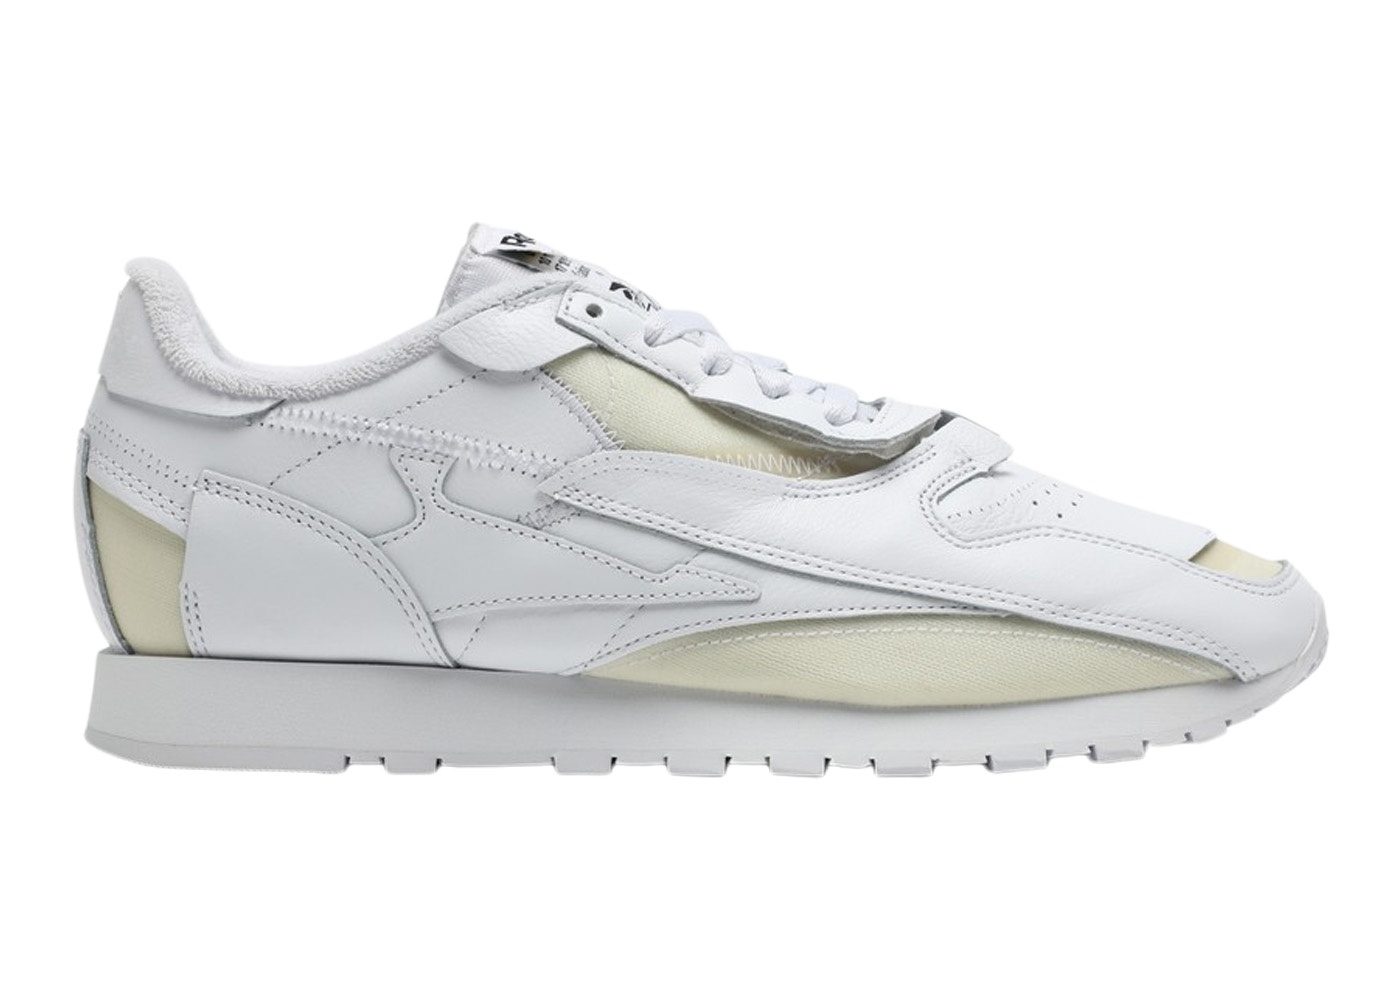 Reebok Classic Leather Re-Co Maison Margiela Project 0 'Memory Of 